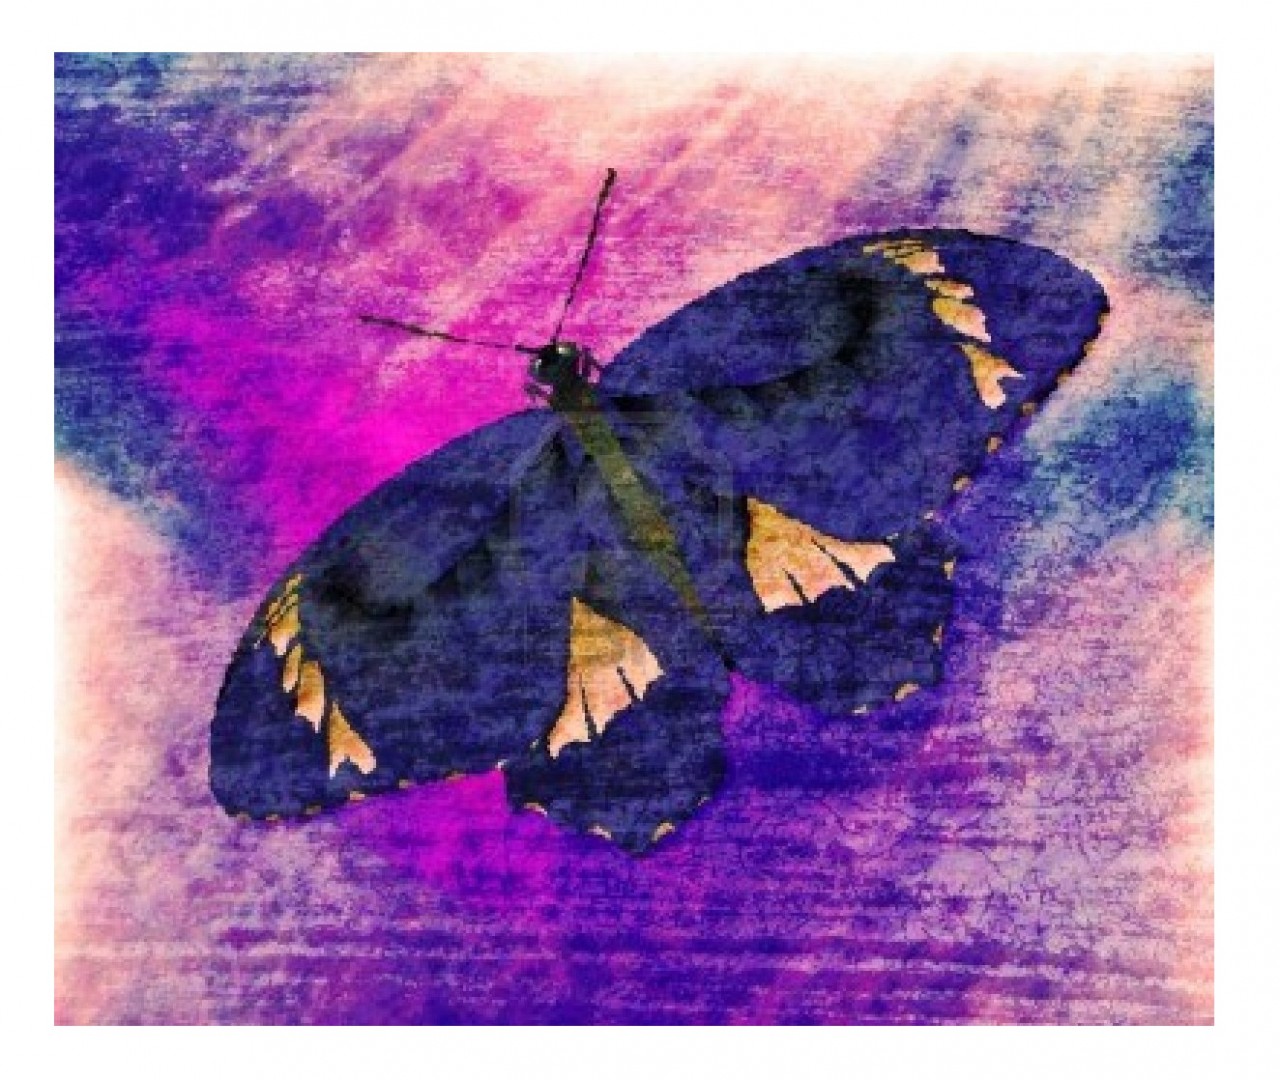 images easyblog articles 10405 b2ap3 large BUTTERFLY